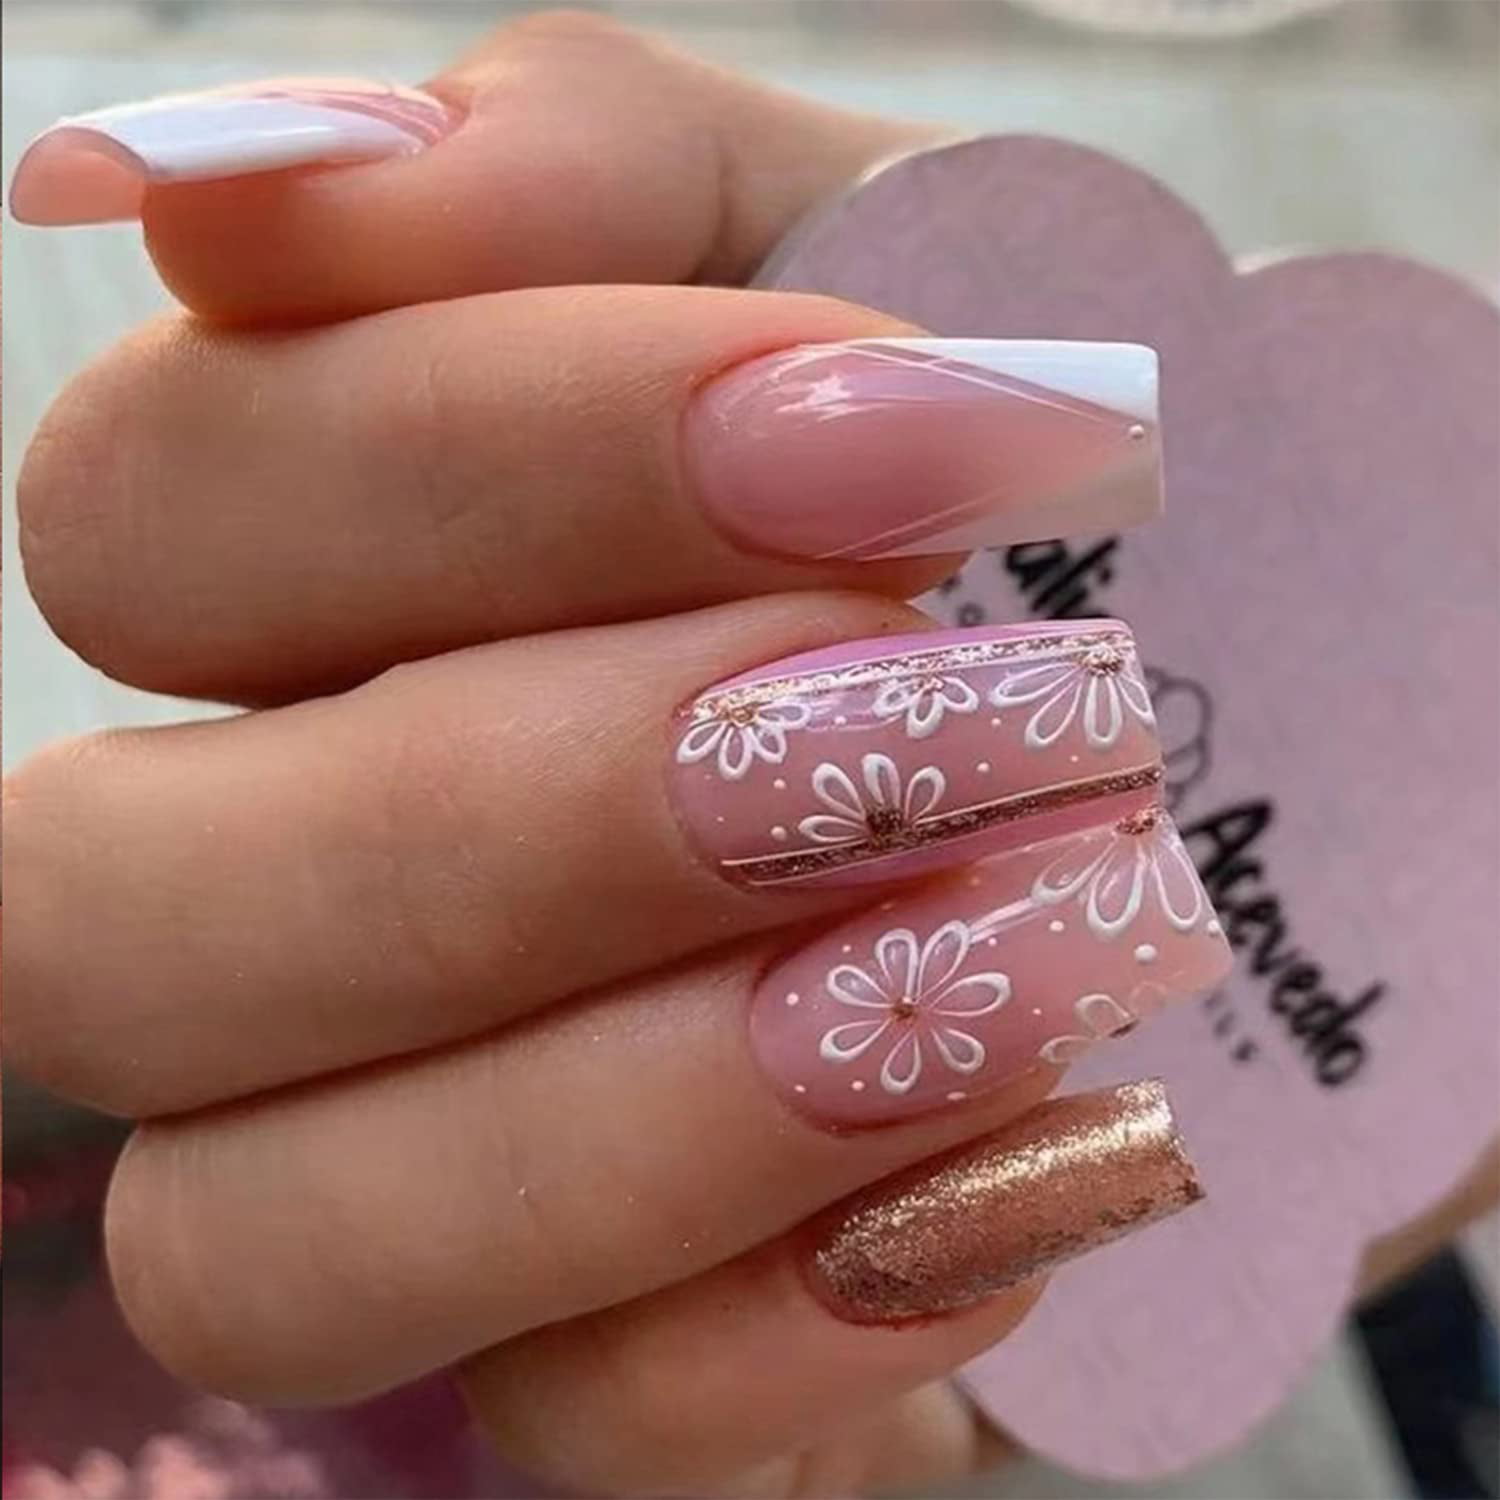 Press on Nails Medium Coffin , Nude Pink Fake Nails Kit with Silver Daisy+  Glitter Design, Exquisite Acrylic Glue on False Nail Stick on Nails for  Women Gifts Reusable Full Cover Gel